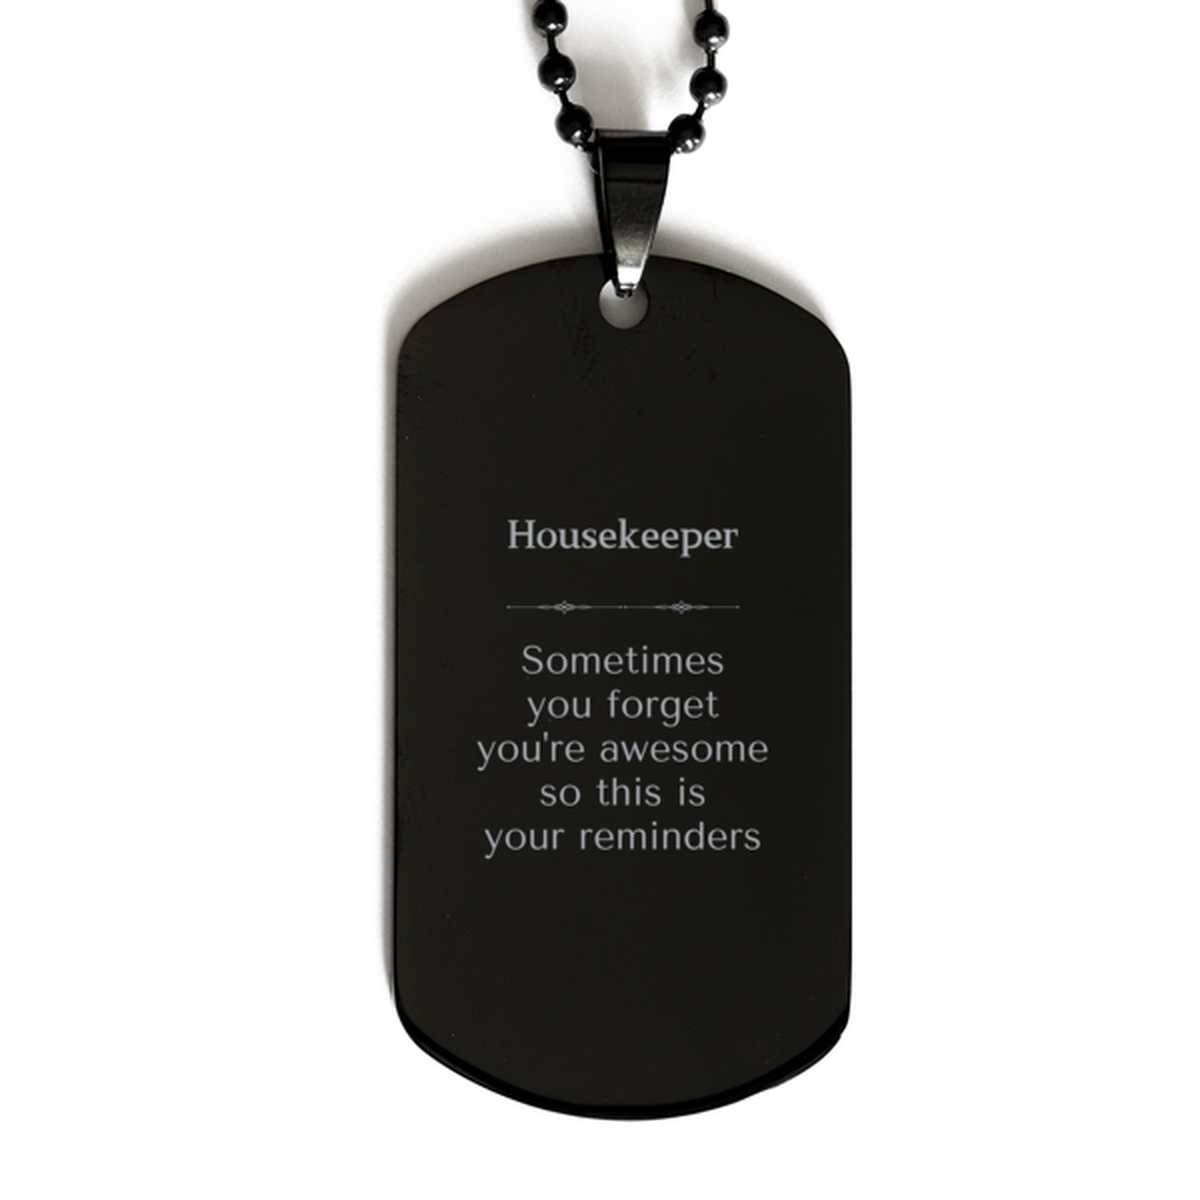 Sentimental Housekeeper Black Dog Tag, Housekeeper Sometimes you forget you're awesome so this is your reminders, Graduation Christmas Birthday Gifts for Housekeeper, Men, Women, Coworkers